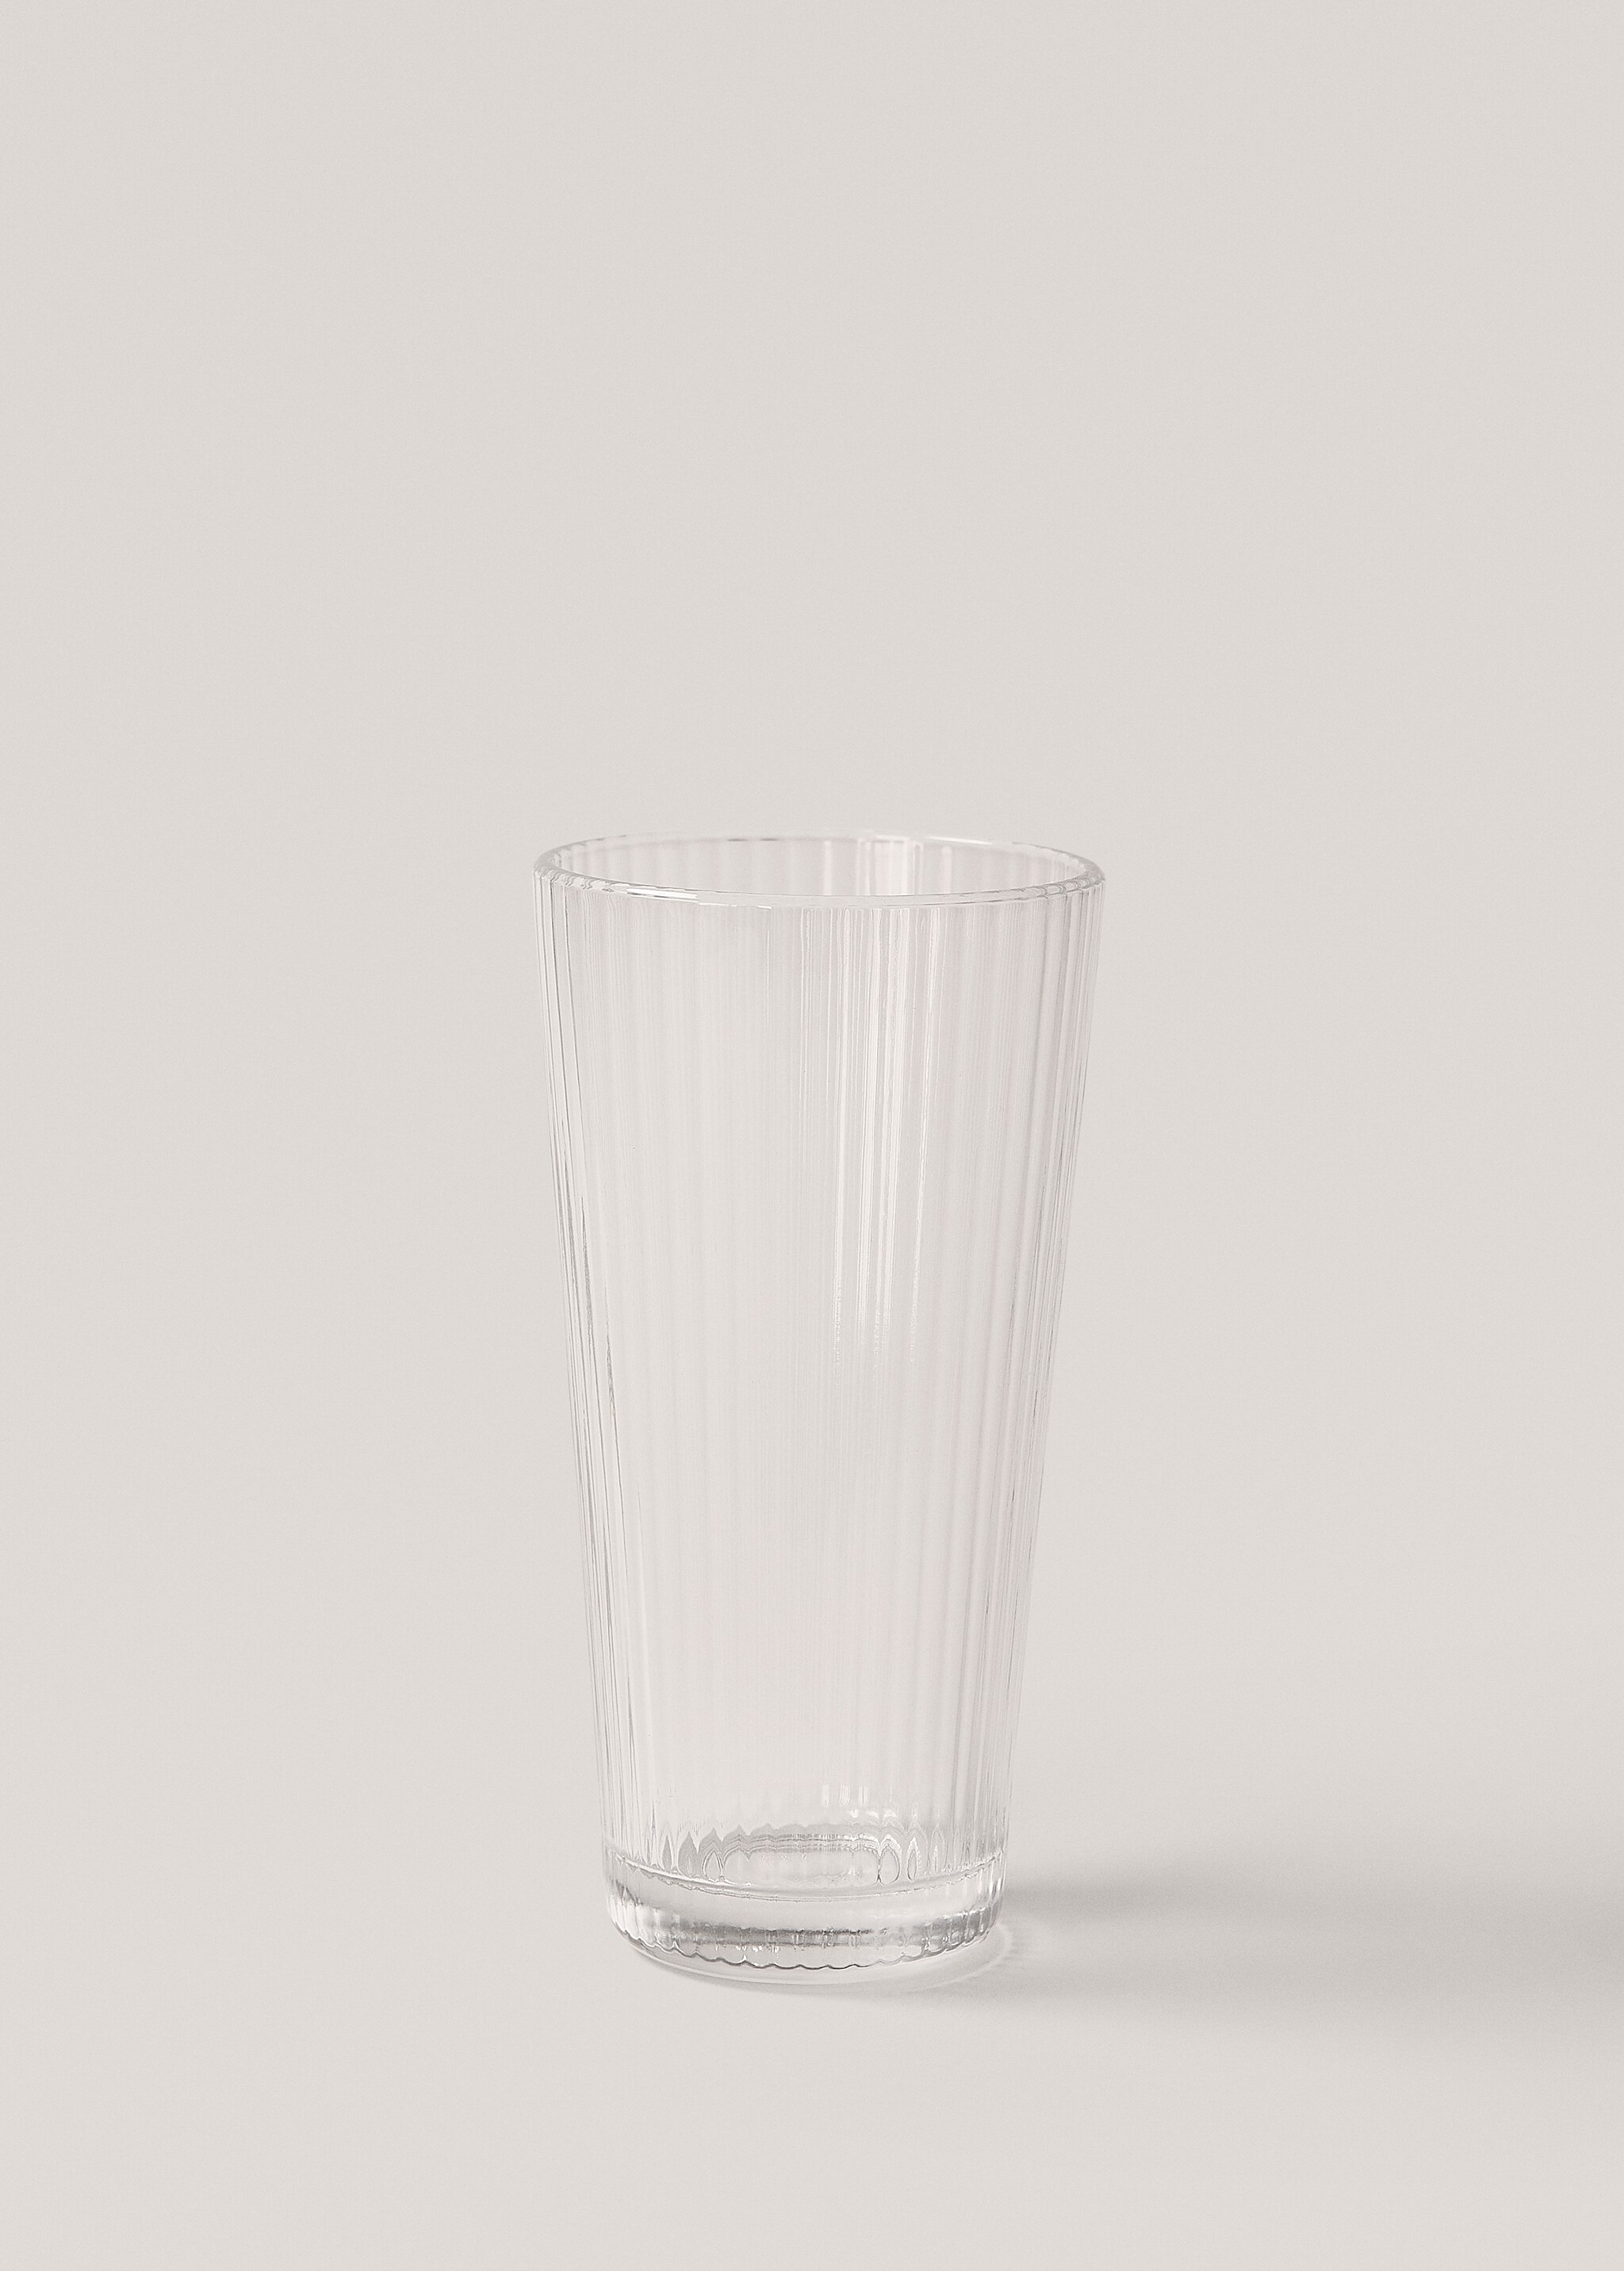 14 cm transparent glass with stripes - Article without model